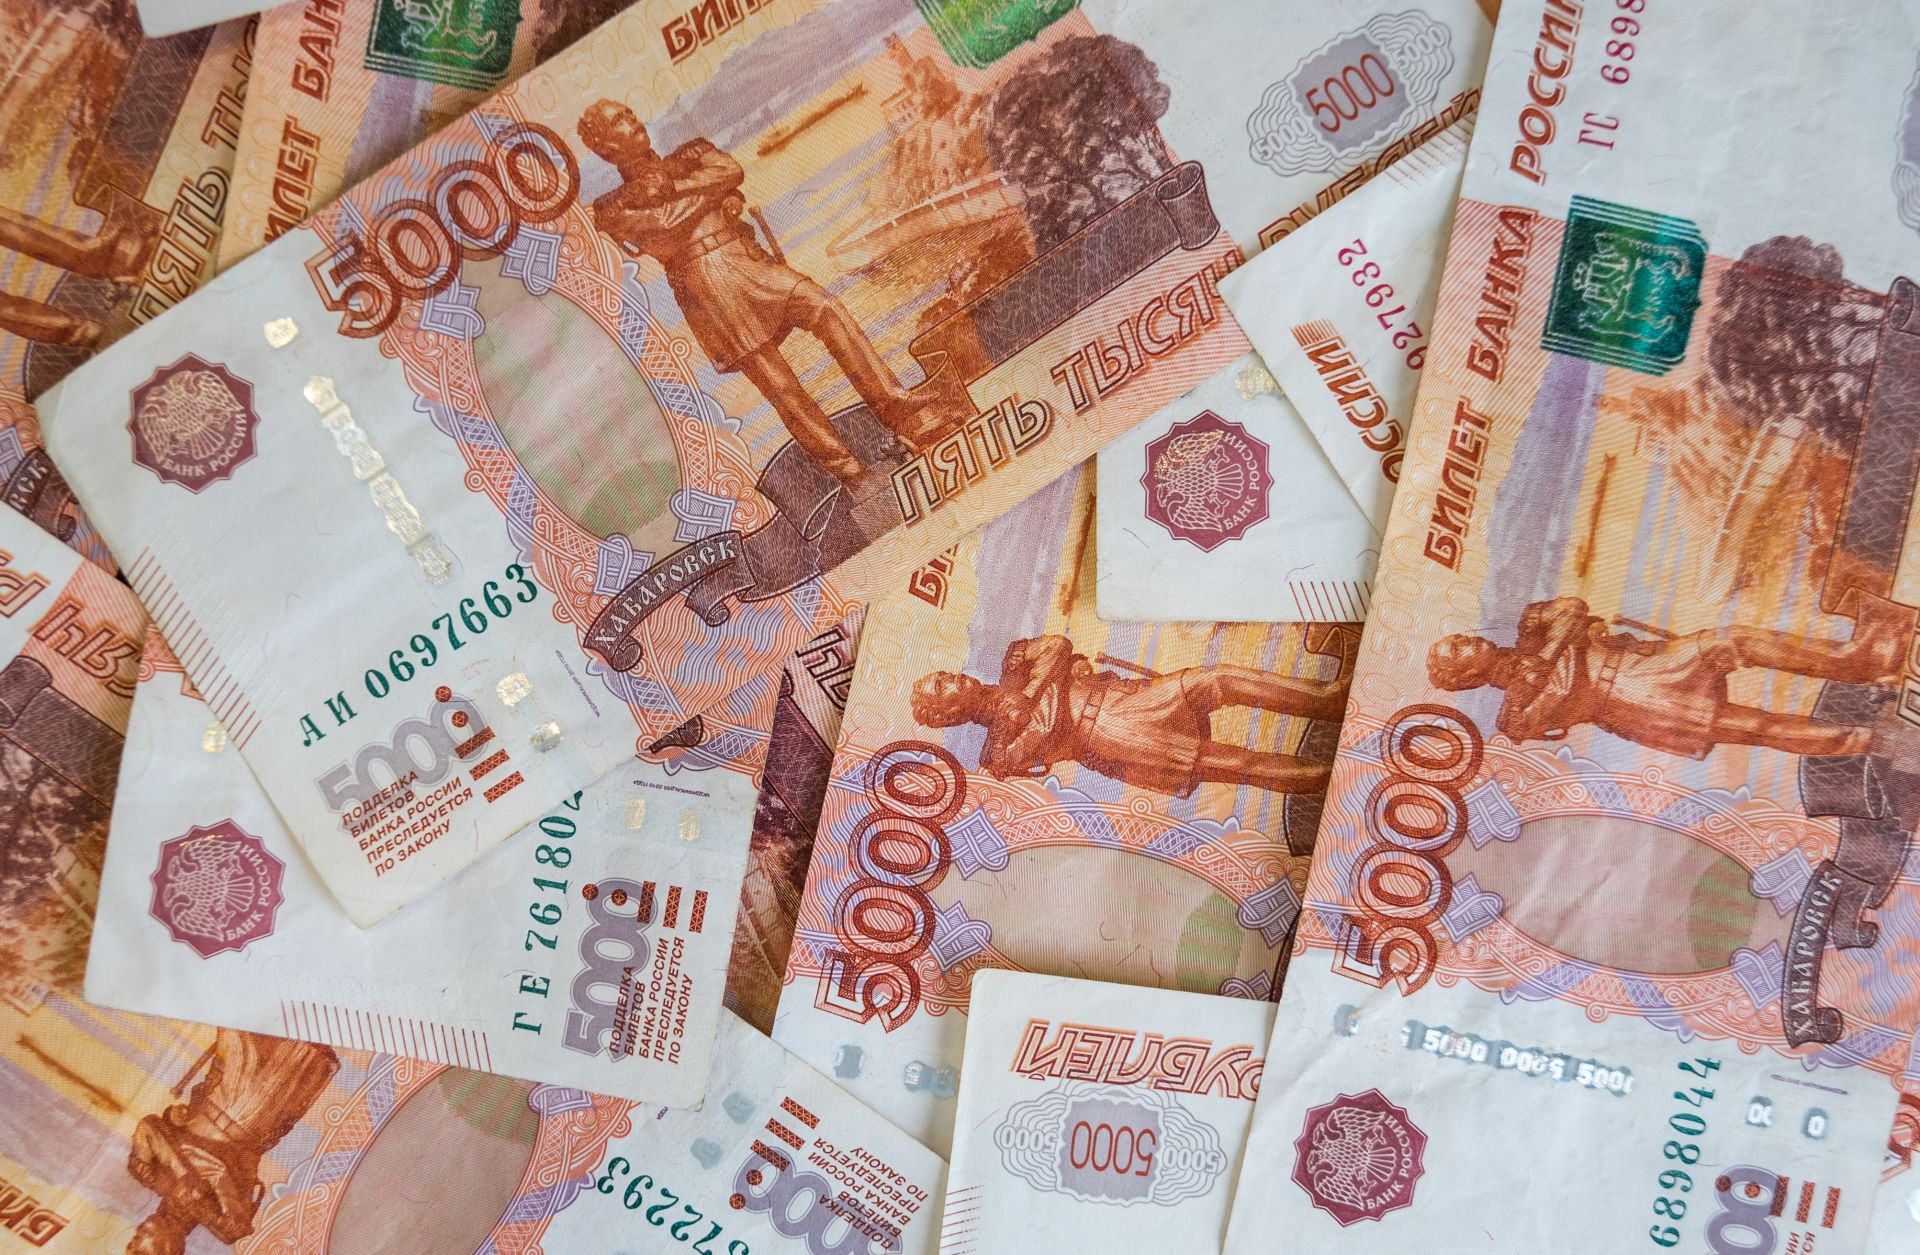 This photo is a close-up shot of Russian ruble banknotes.